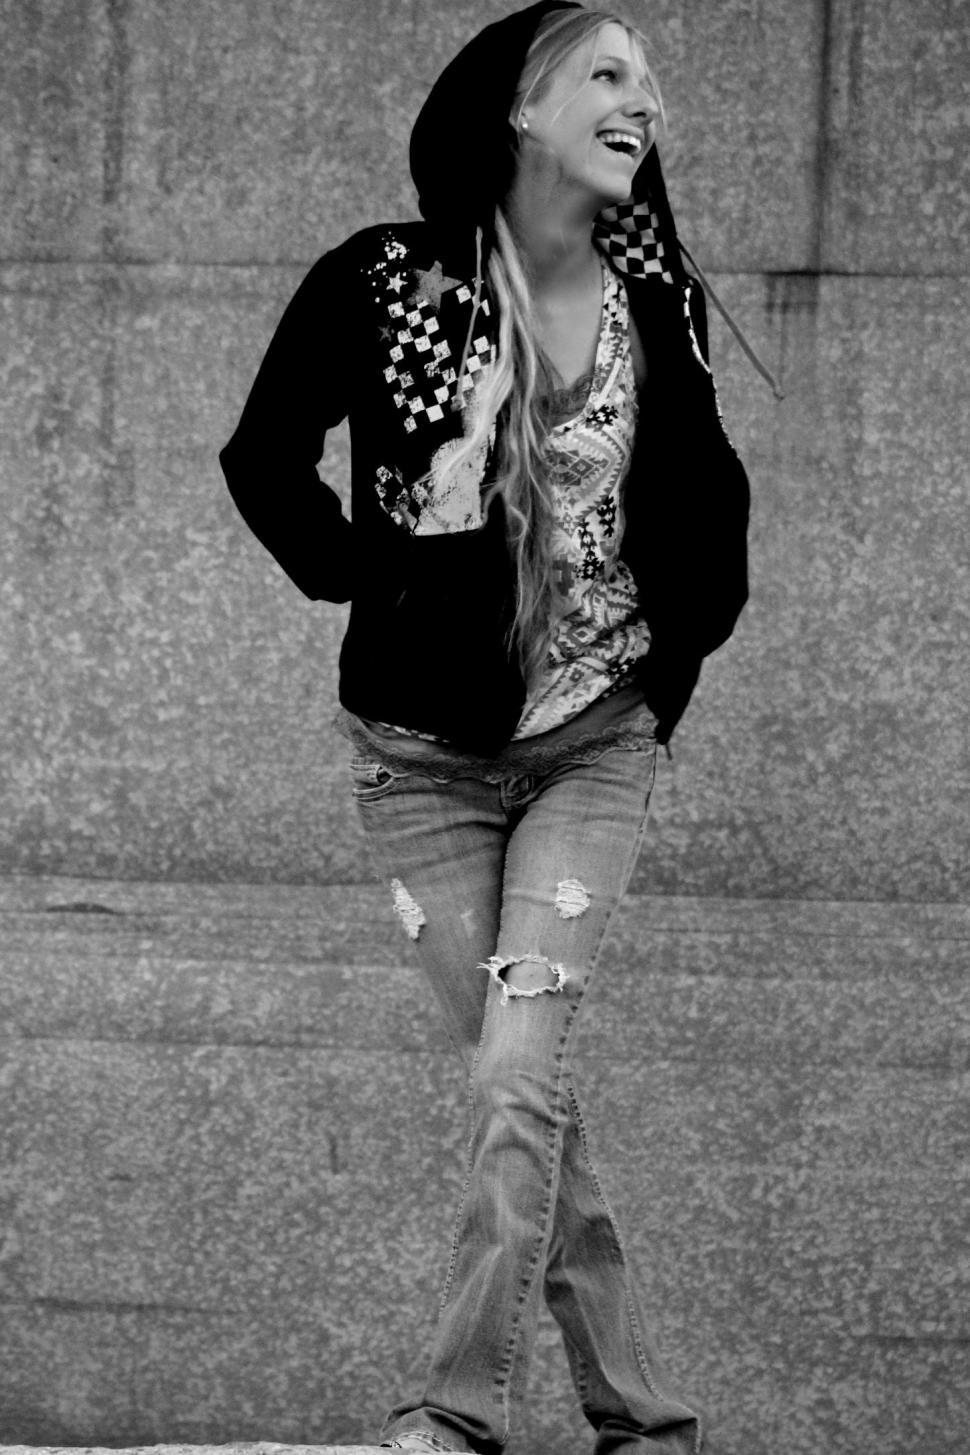 Free Image of Stylish Woman in black hooded jacket and ripped jeans - B&W 